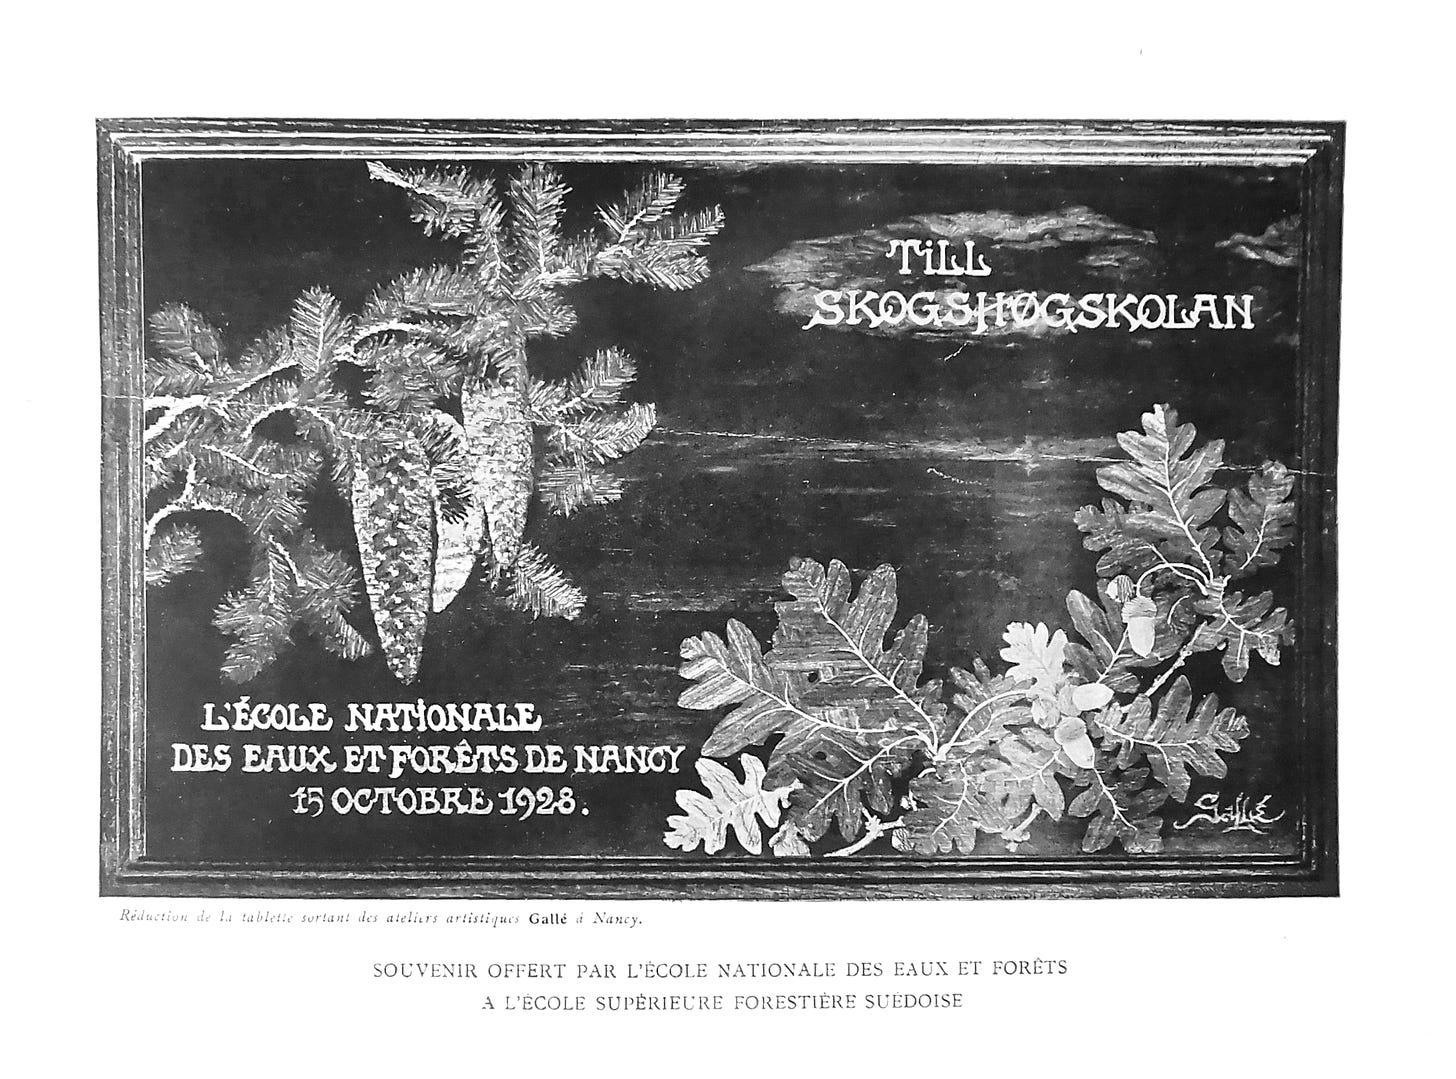 Auguste Herbst, Oak and spruce tray signed with the Mk IX, gift from the École nationale des eaux et forêts to their Swedish counterpart, 15/10/1928 (private collection). 